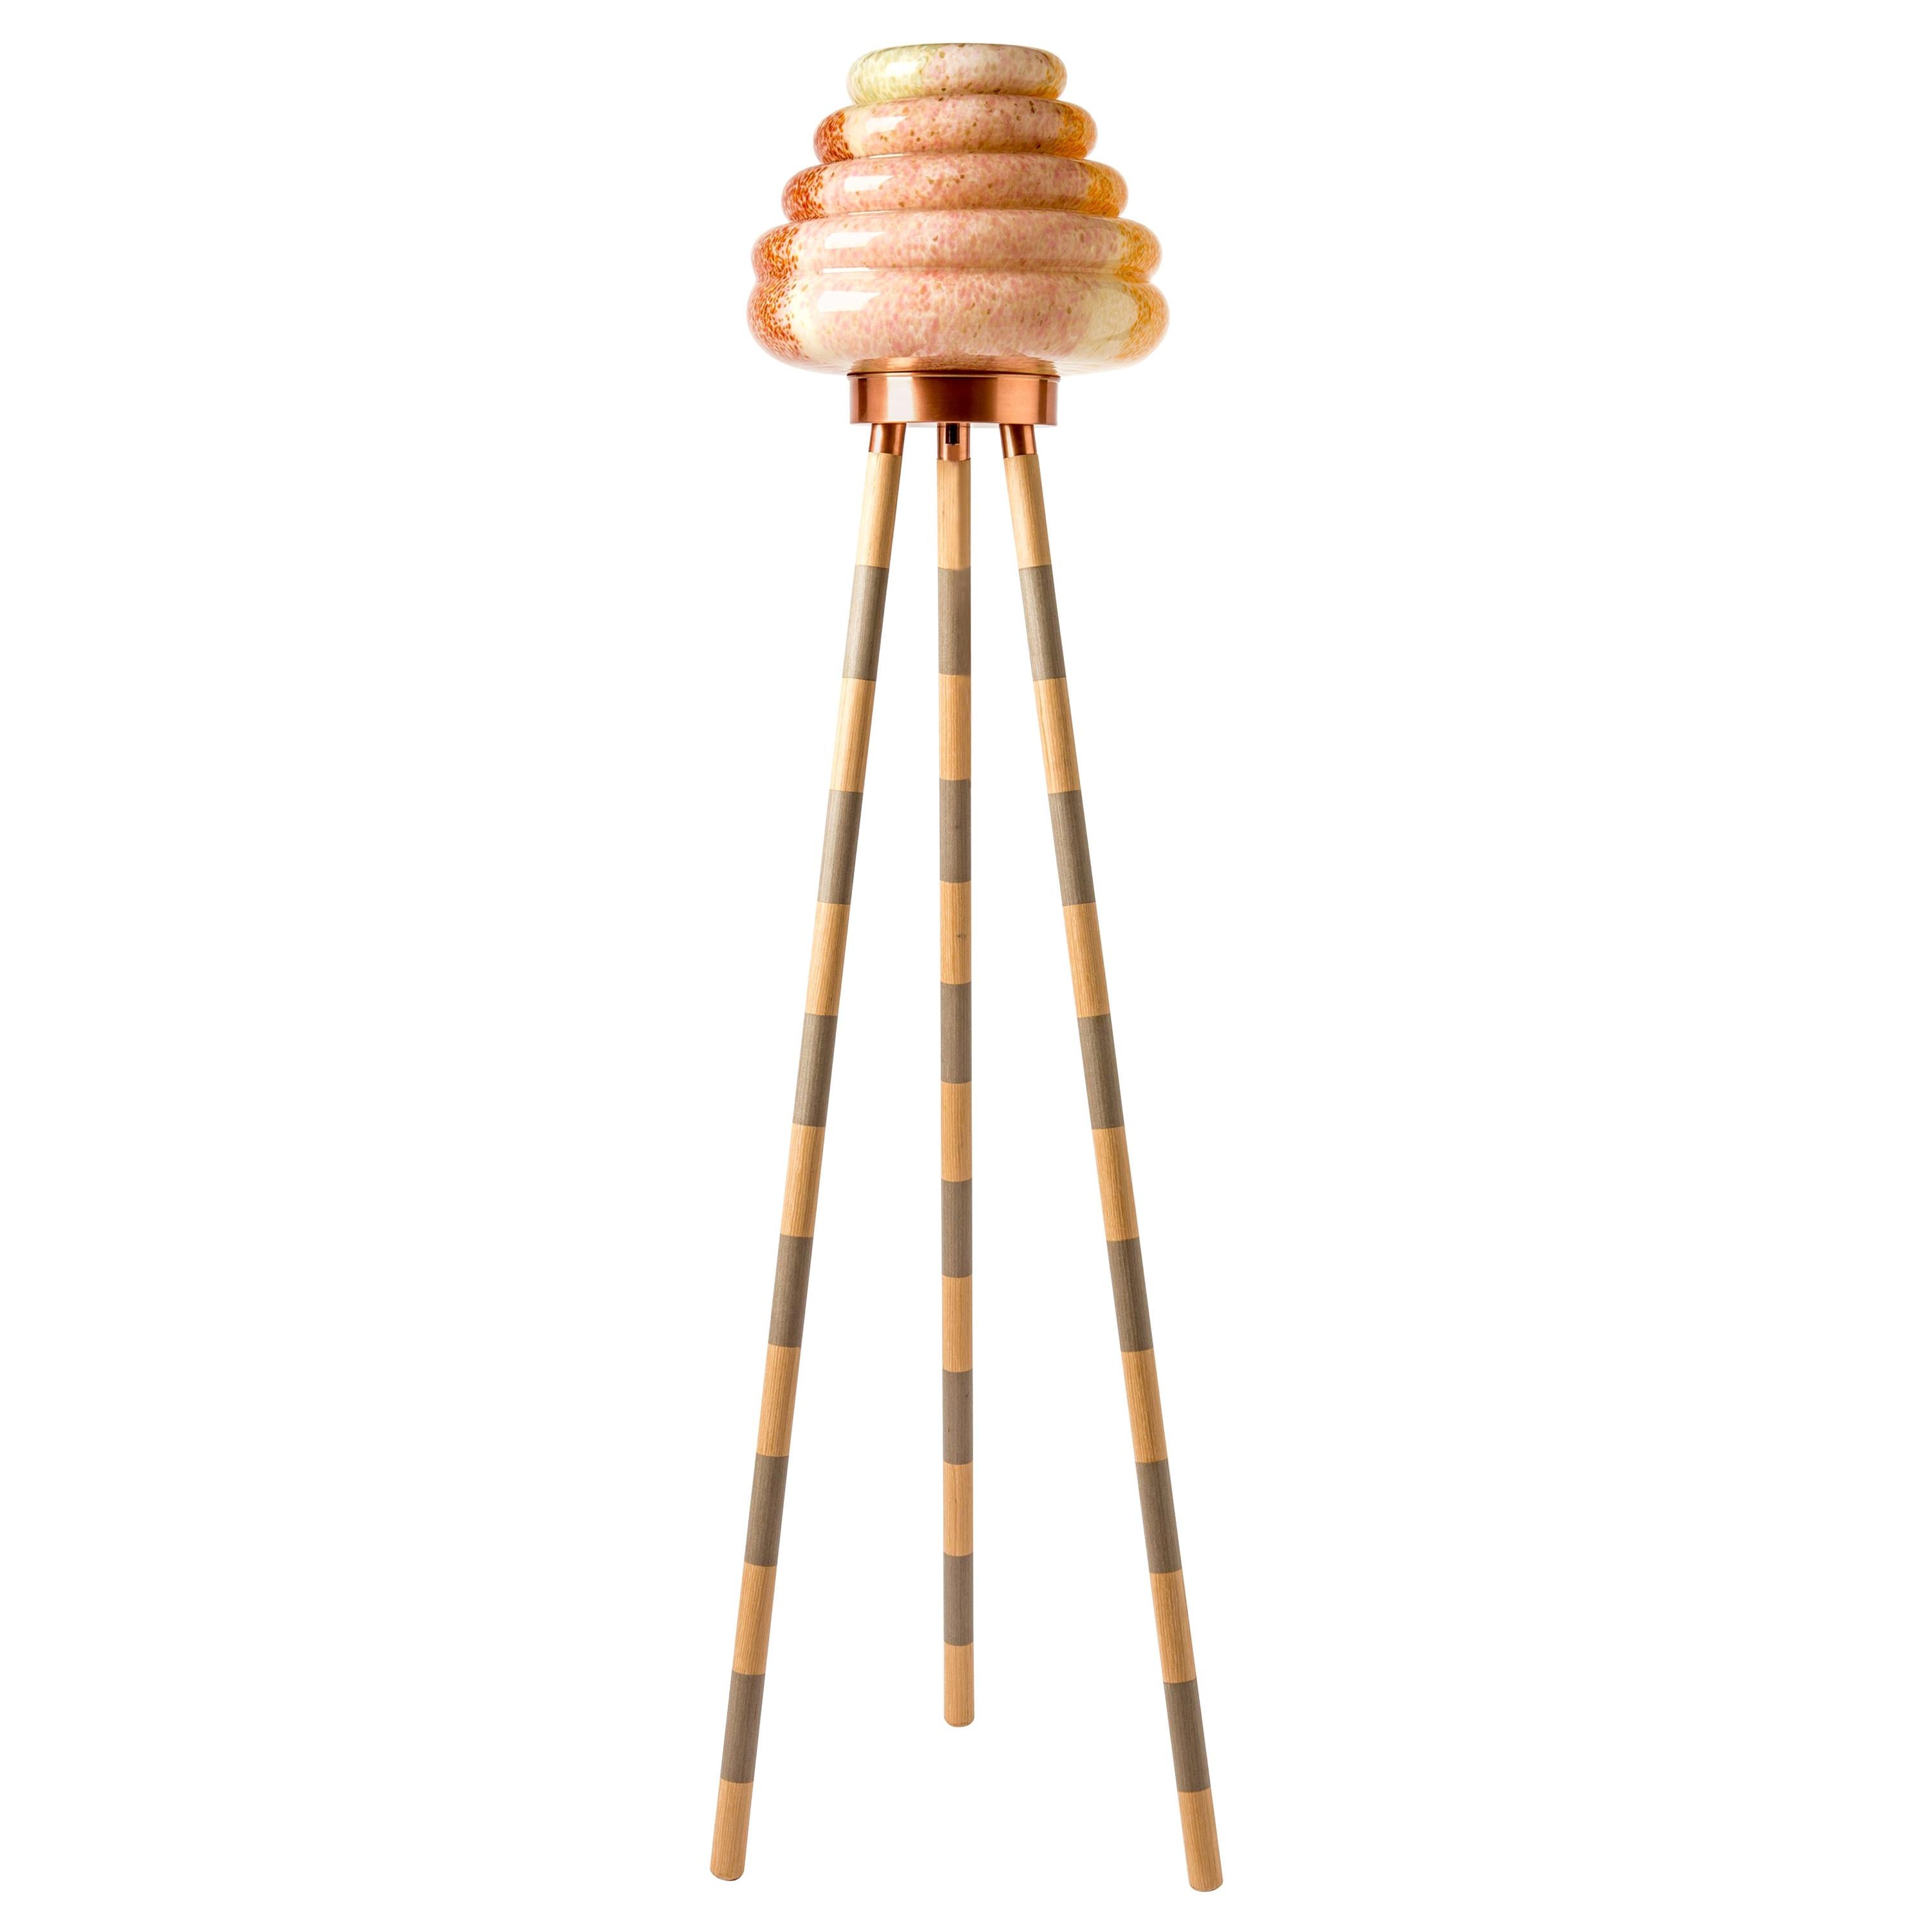 Colmena Beehive Floor Lamp Hand Blown Colored Glass Lampshade, Polished Copper im Angebot